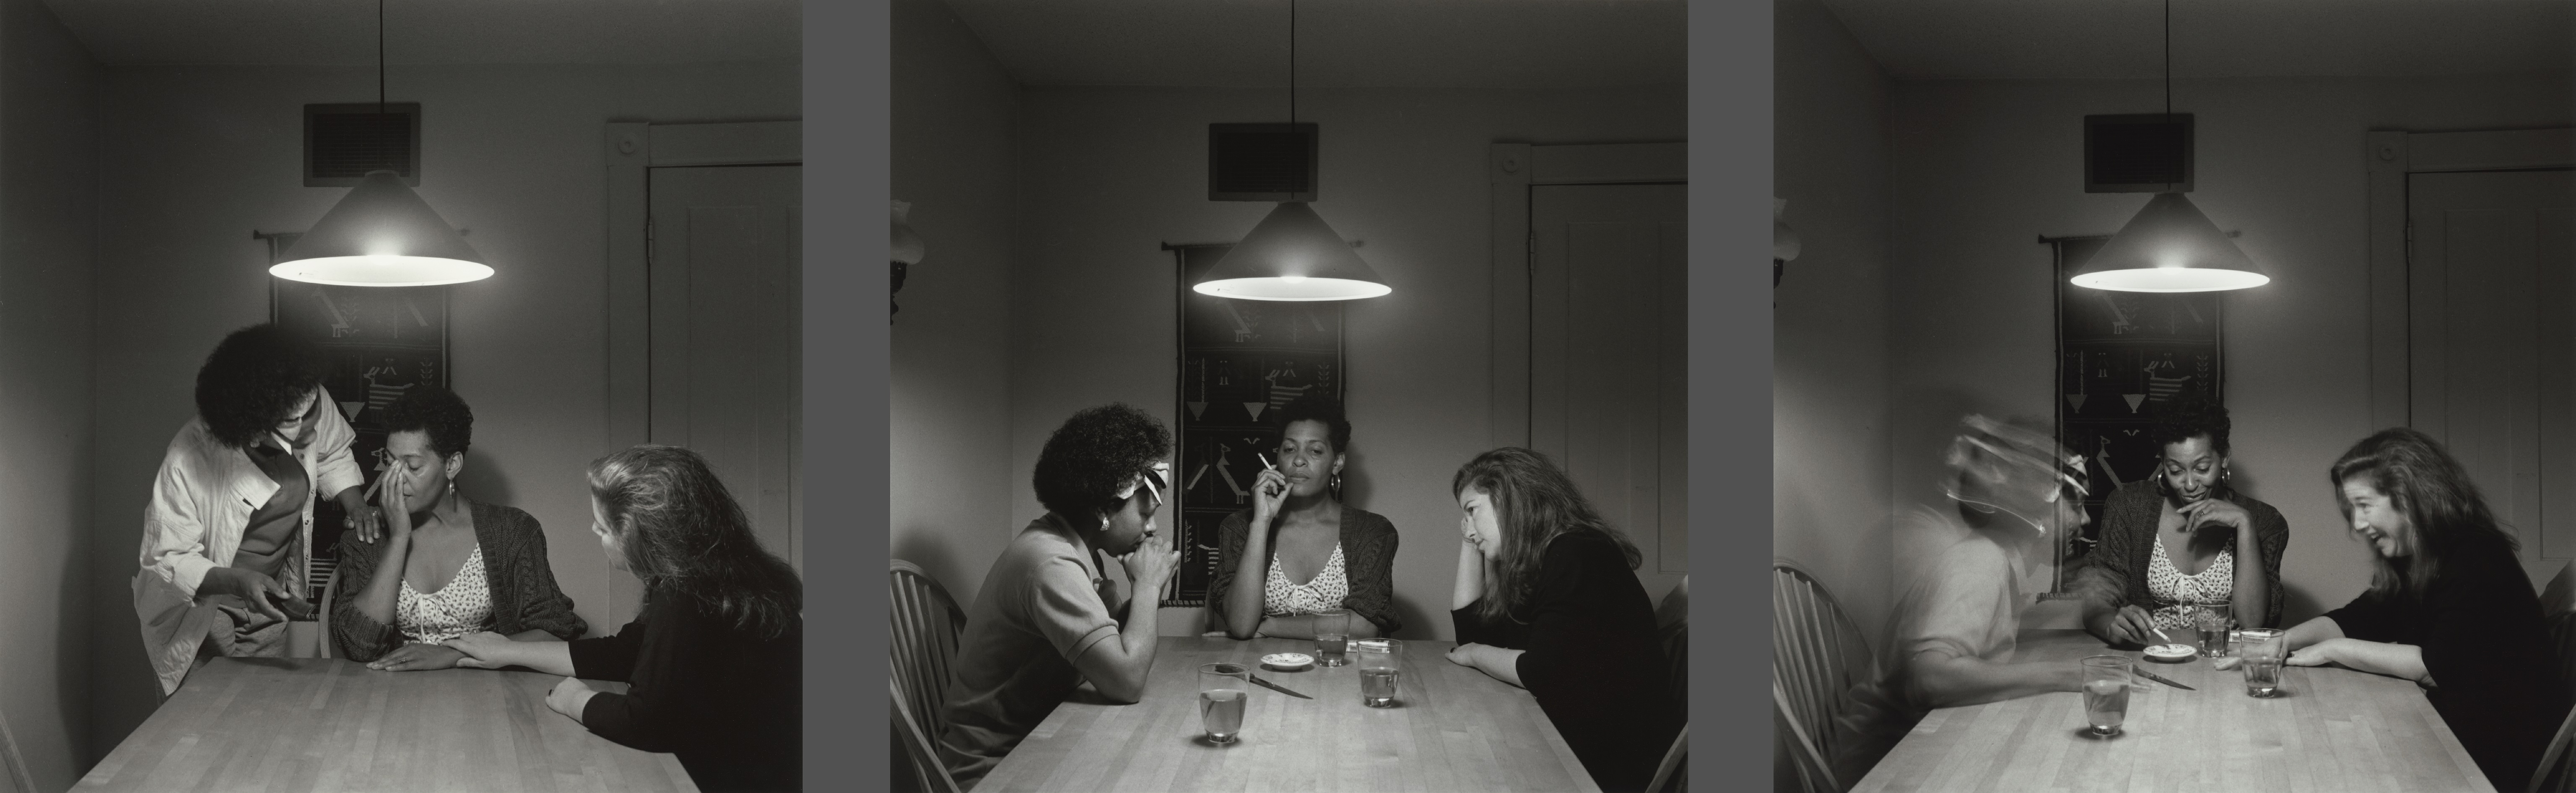 Untitled (Woman with friends) from the Kitchen Table Series